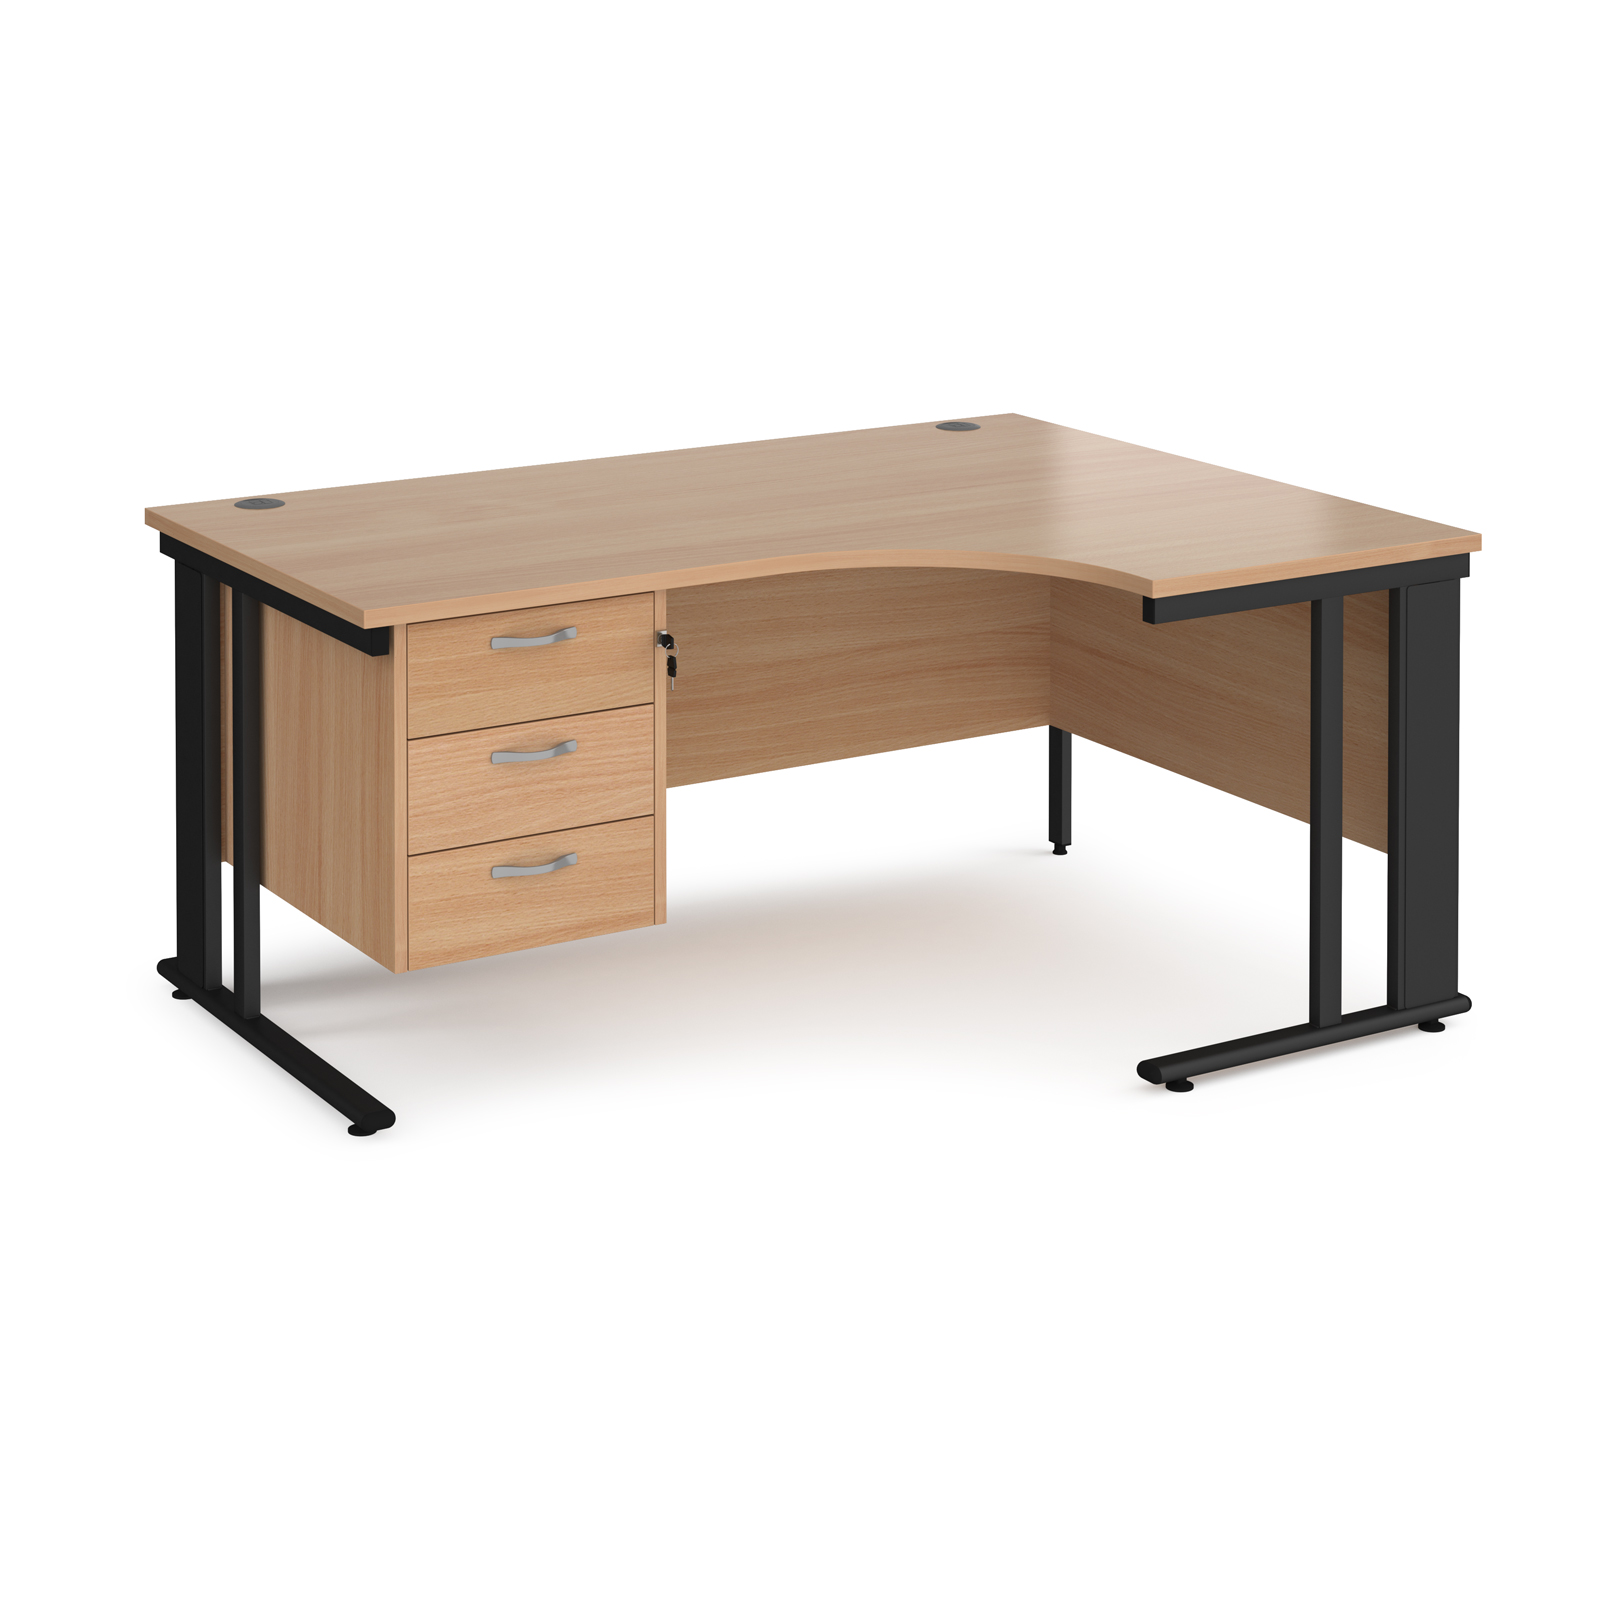 Maestro 25 right hand ergonomic desk 1600mm wide with 3 drawer pedestal - black cable managed leg frame, beech top